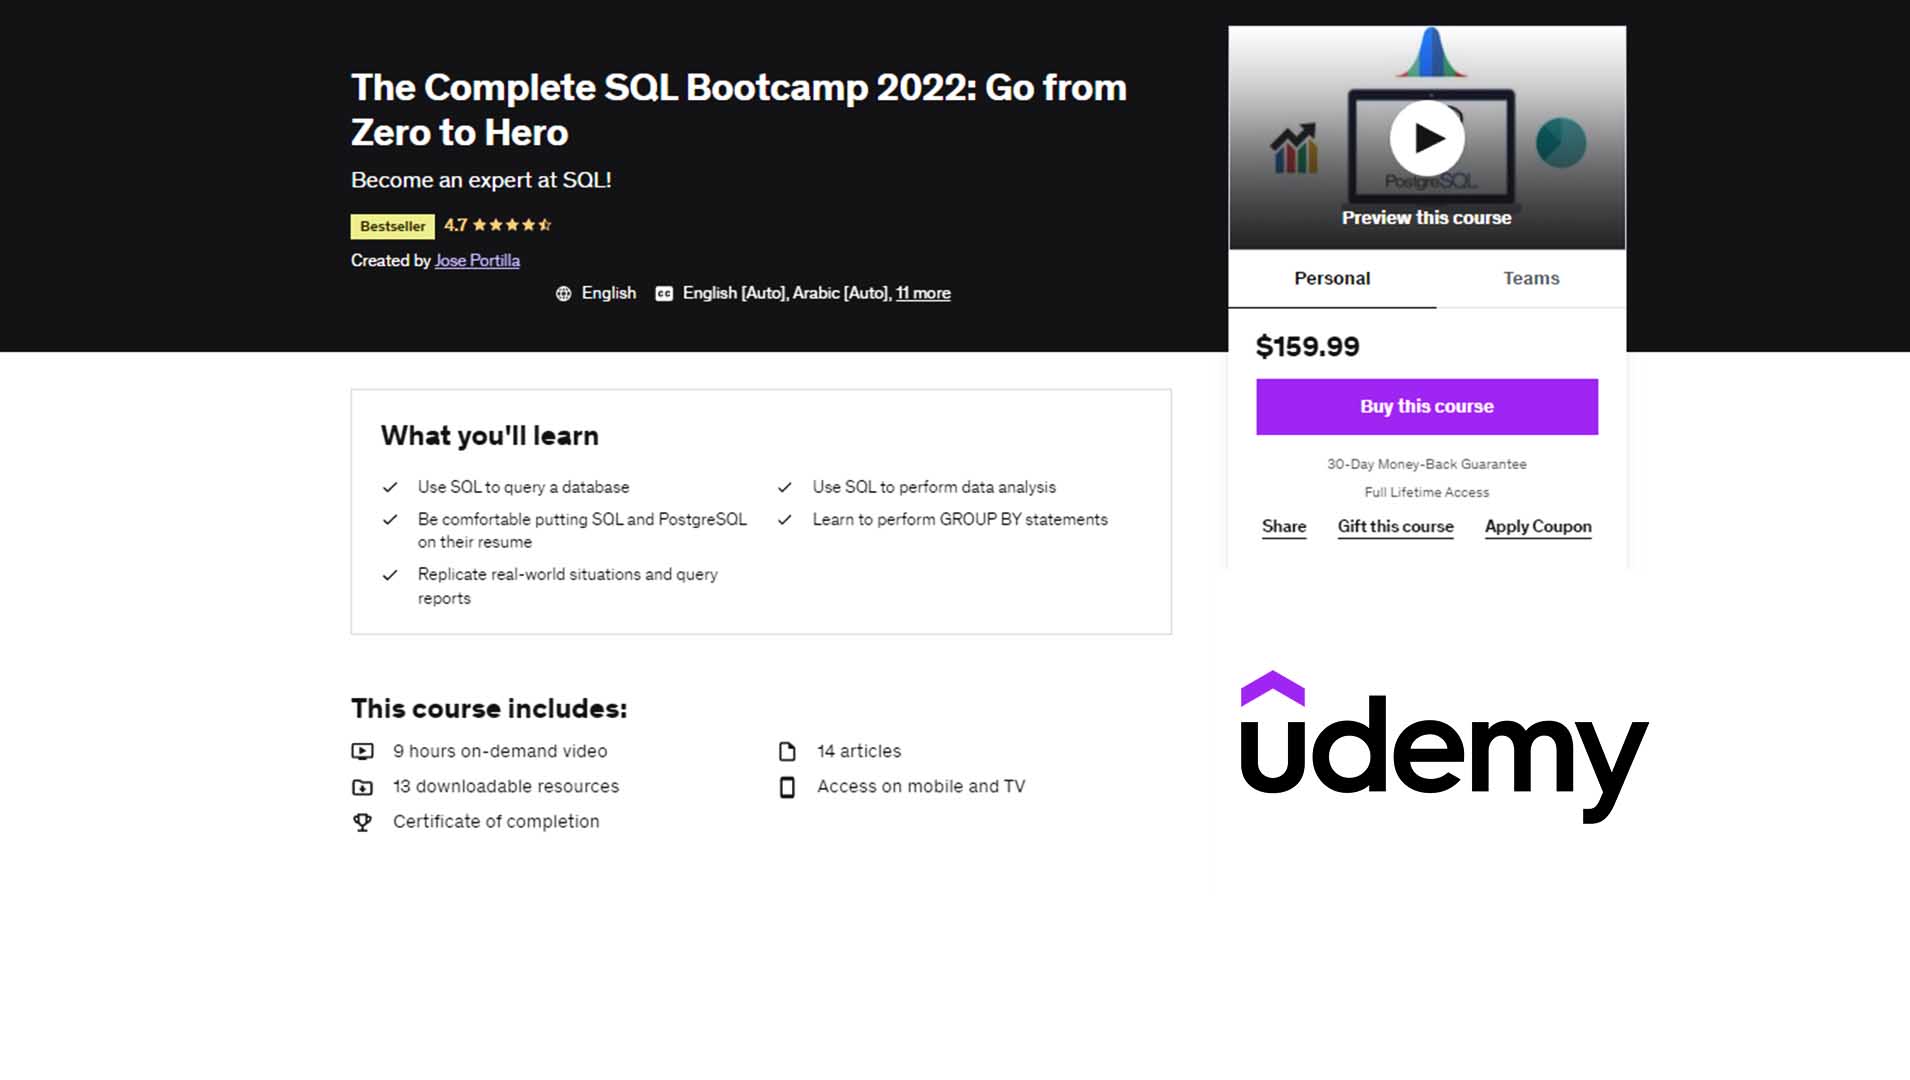 The Complete SQL Bootcamp 2022: Go from Zero to Hero